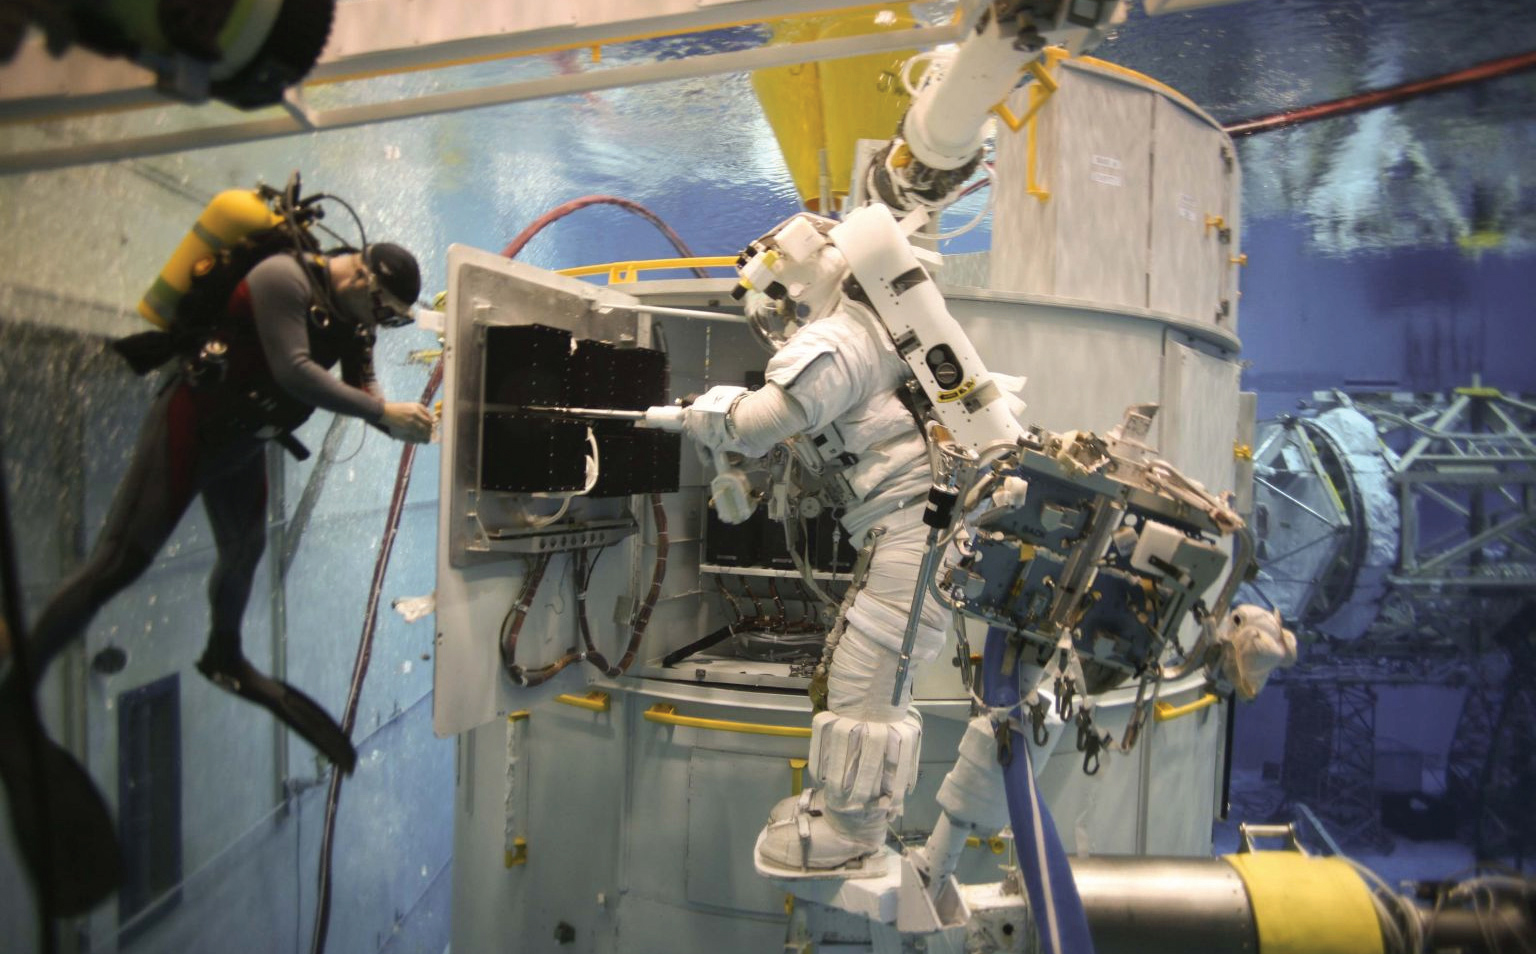 A mock-up of the Hubble Space Telescope in an enormous tank of water. An astronaut, standing on a replica of the Space Shuttle's robotic Canadarm is practicing the installation of Hubble's Science Instrument Command and Data Handling Module. On the far left, a scuba diver works on another component.